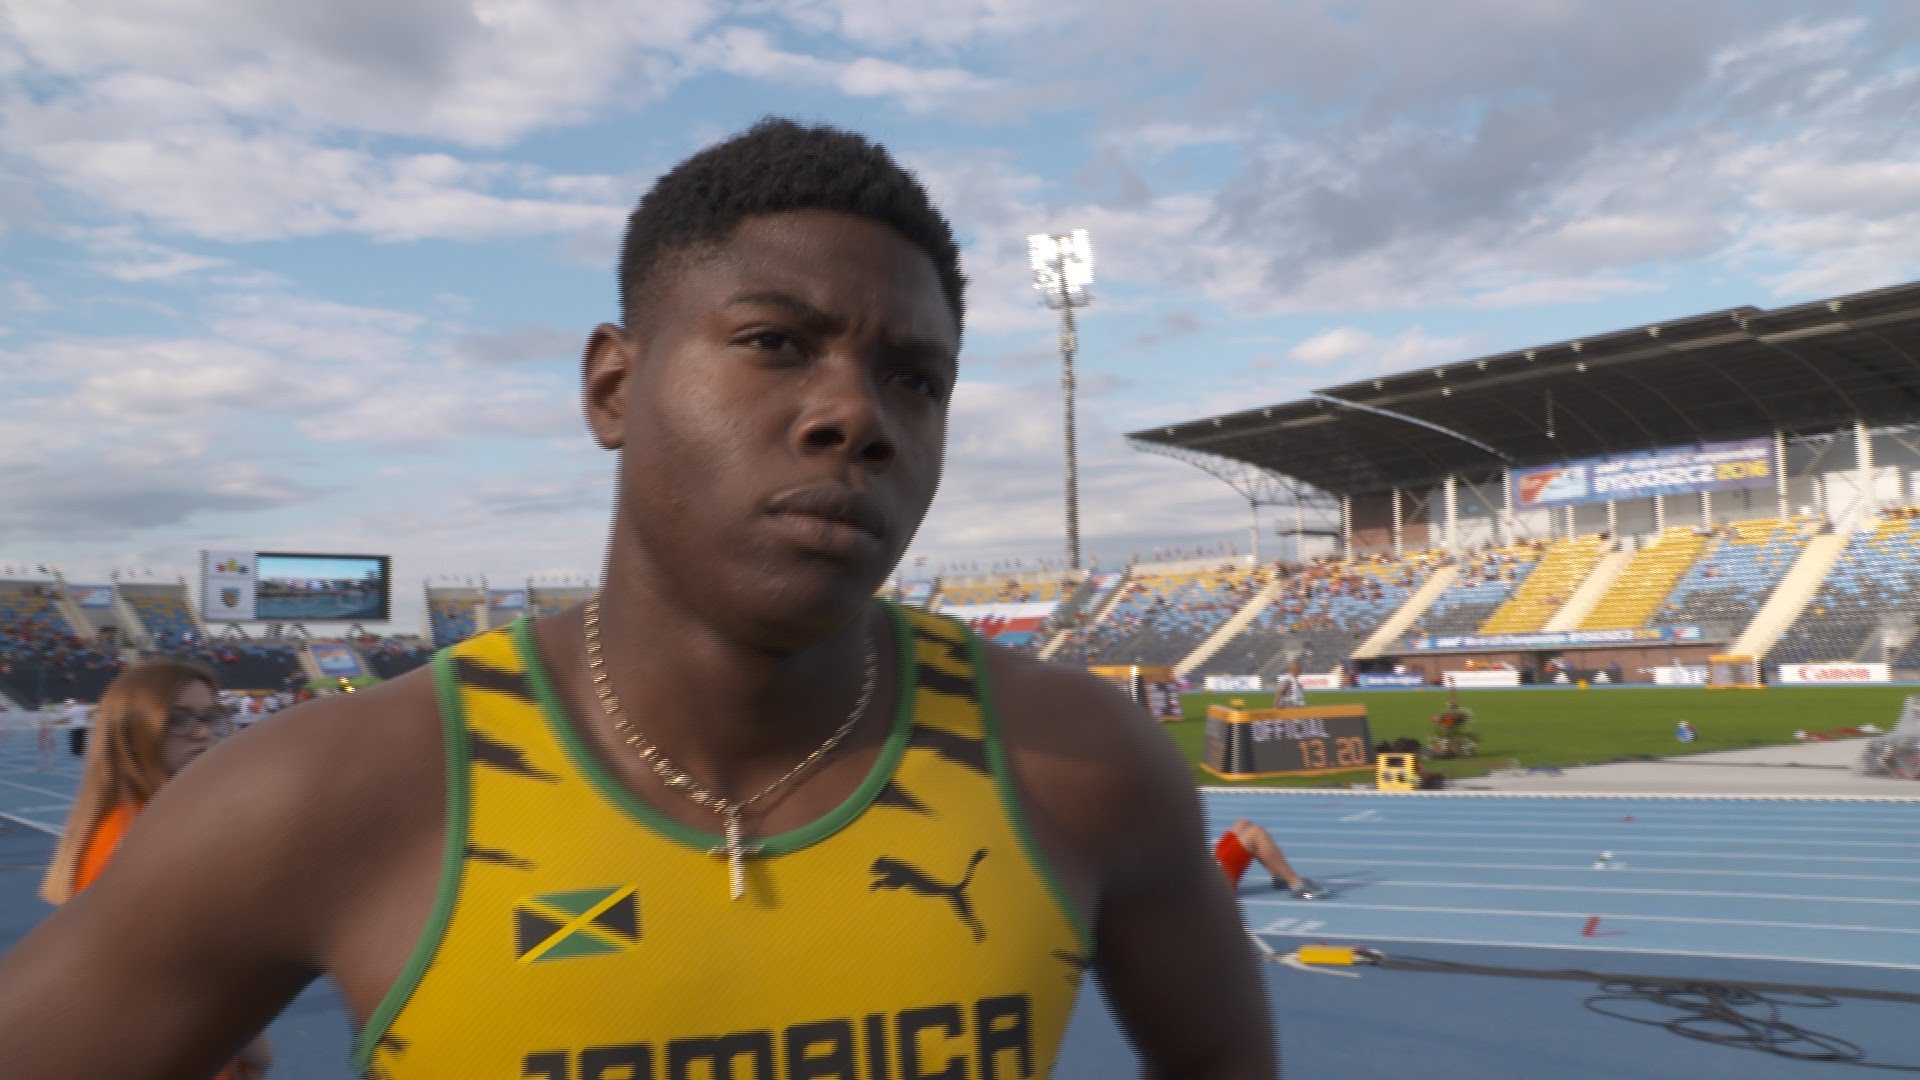 Russell eyes 110m hurdles gold #U20Champs